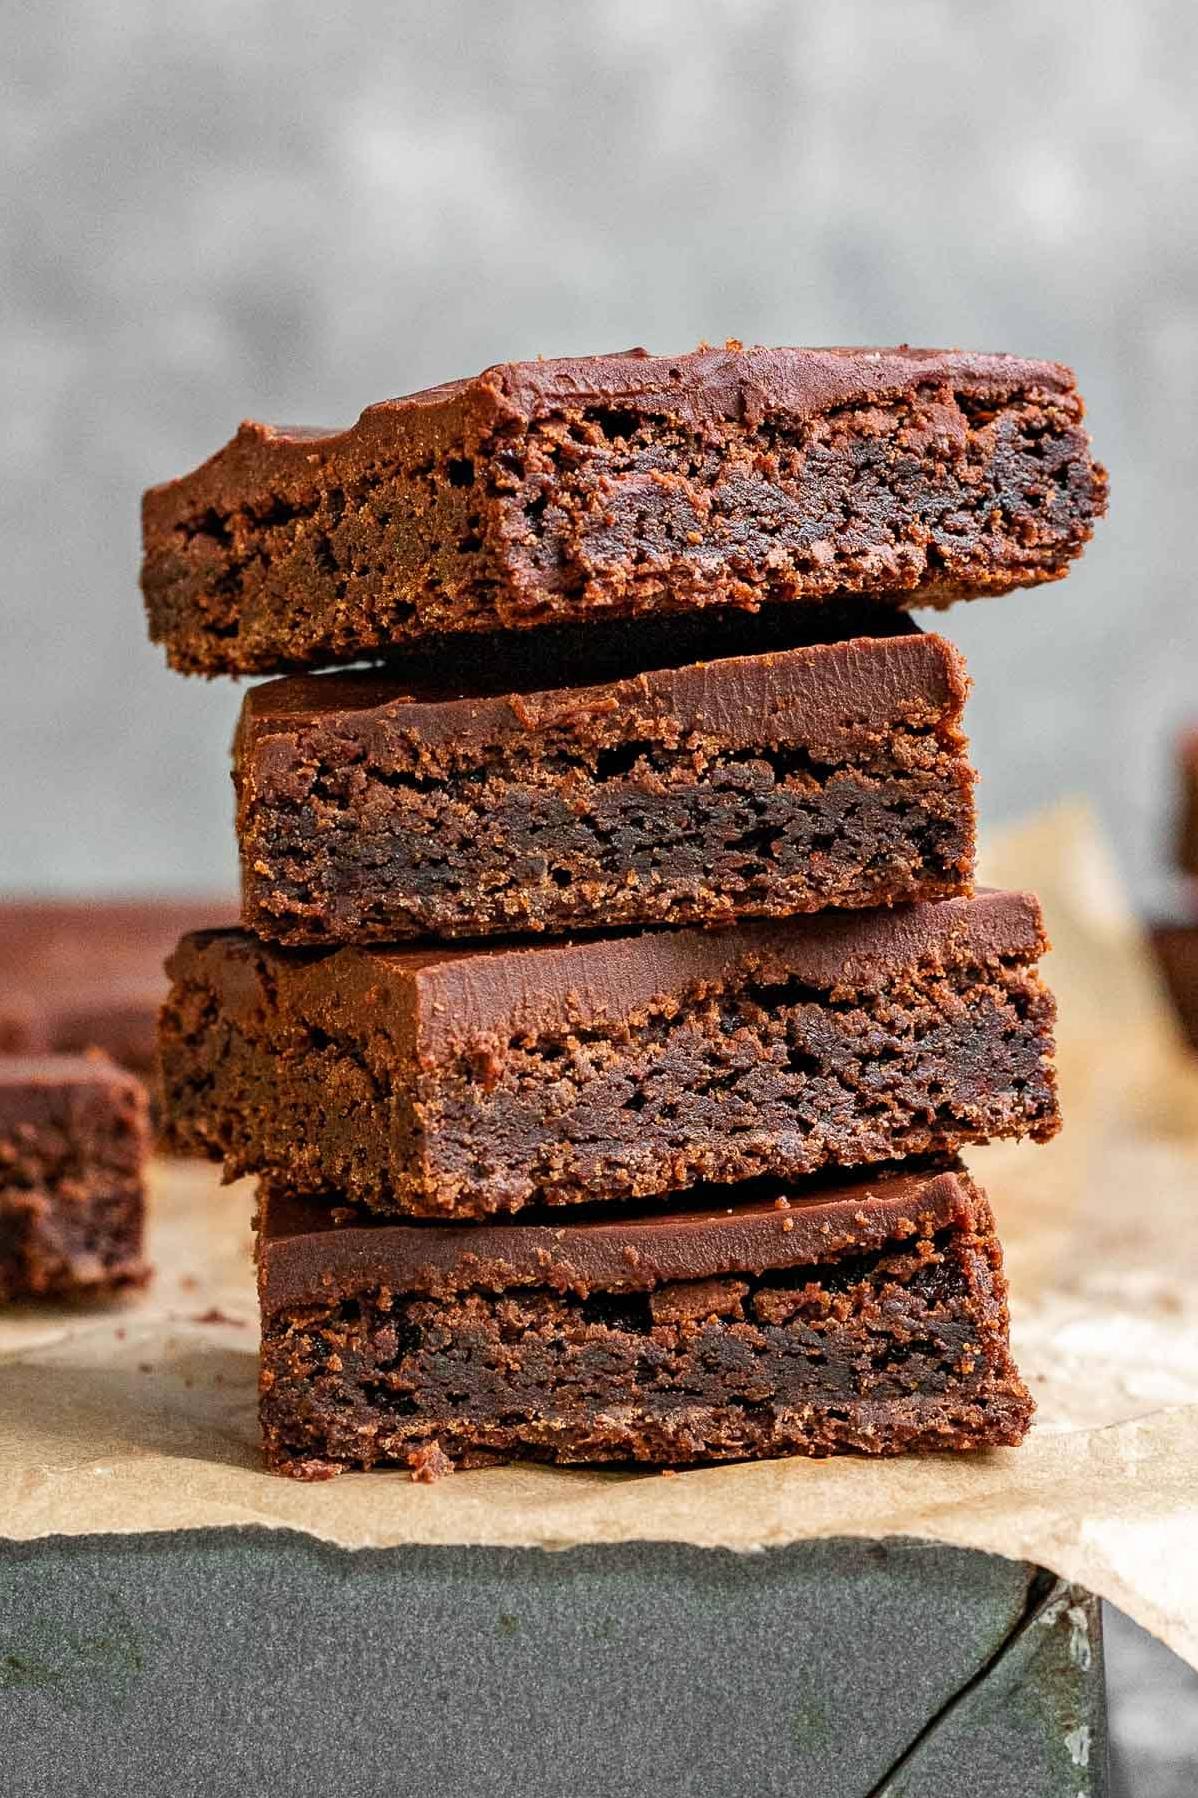  You won't believe how easy it is to make these decadent brownies.